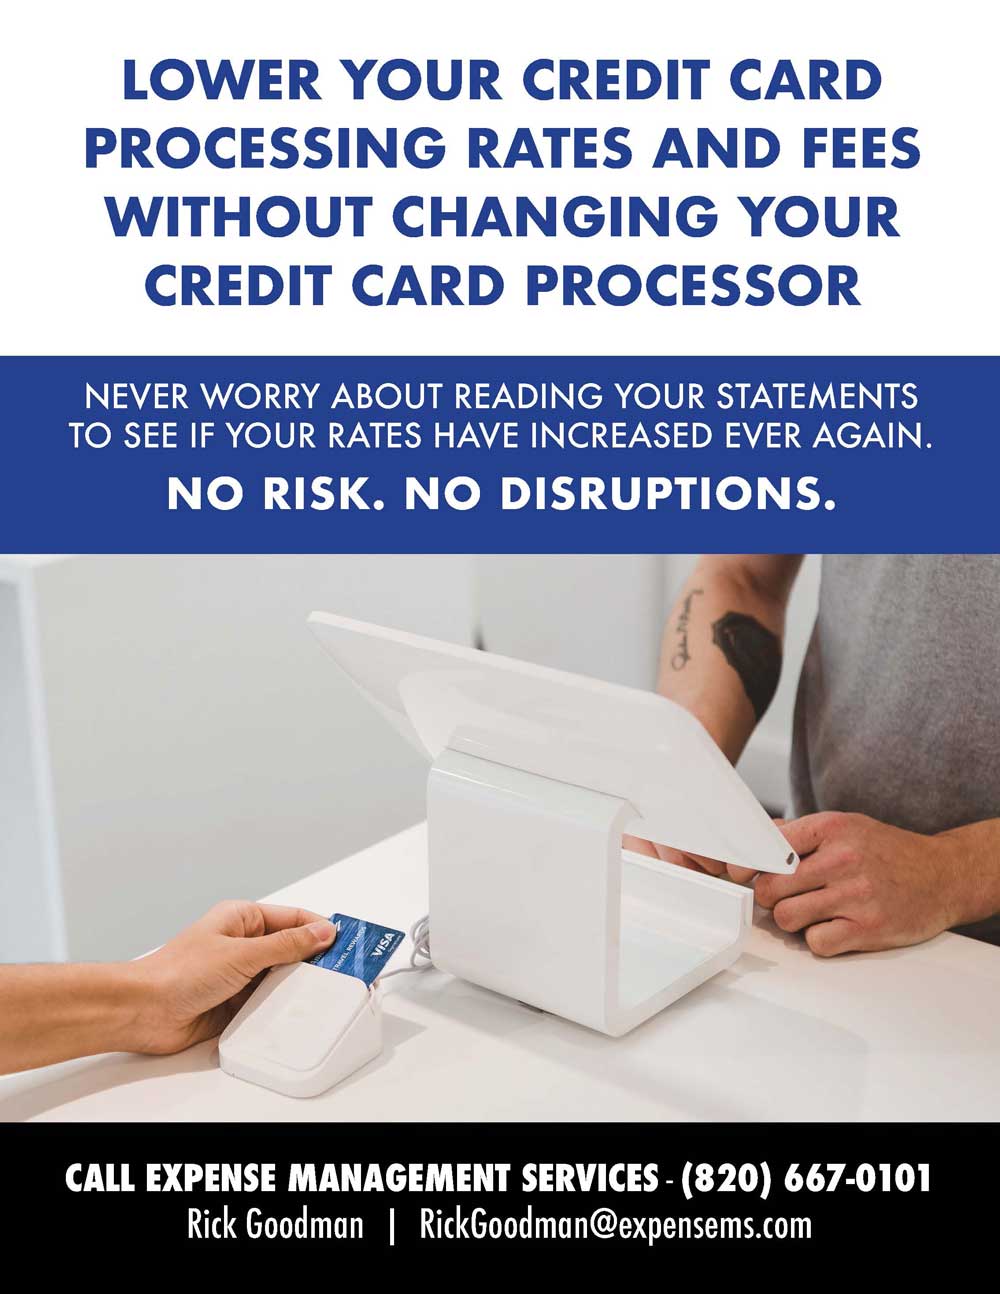 Lower your credit card processing rates and fees